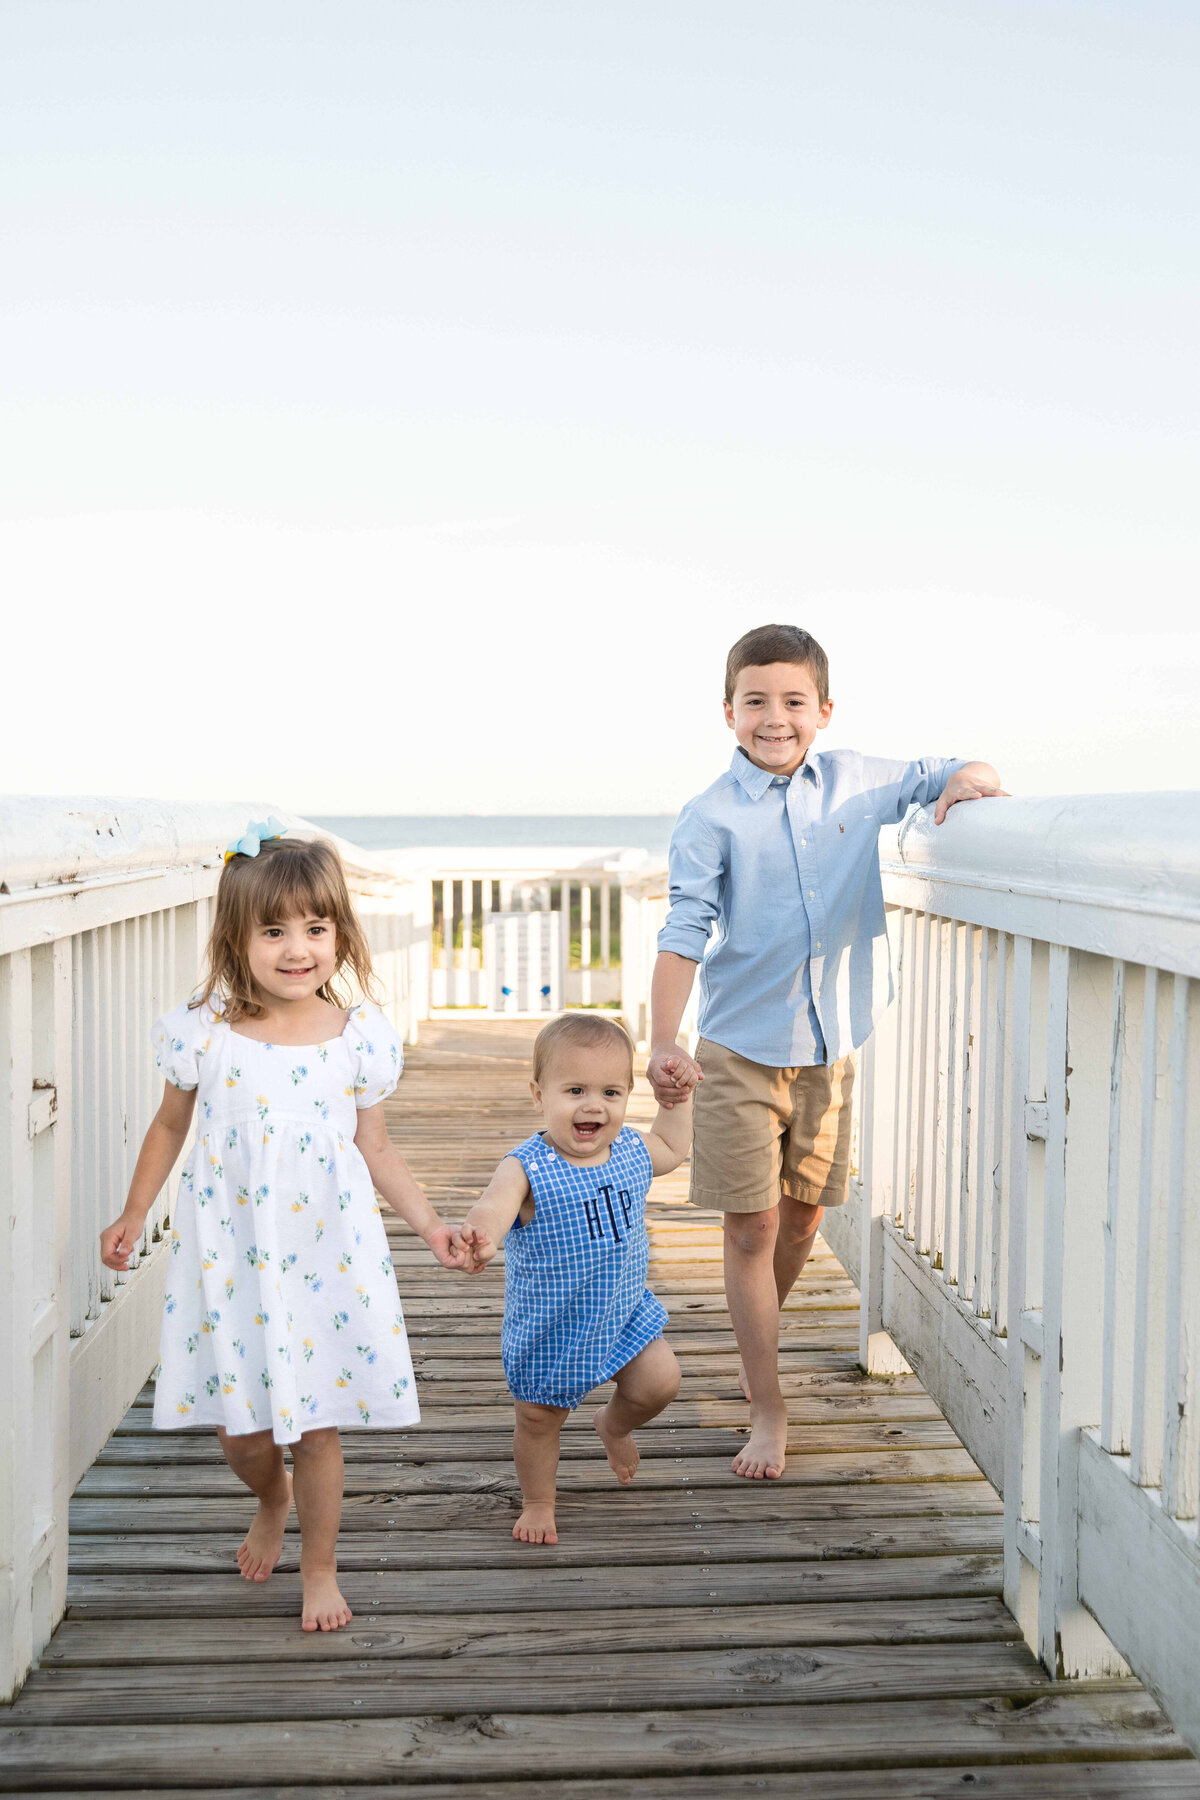 Traber_FamilySession_KobyBrownPhotography018